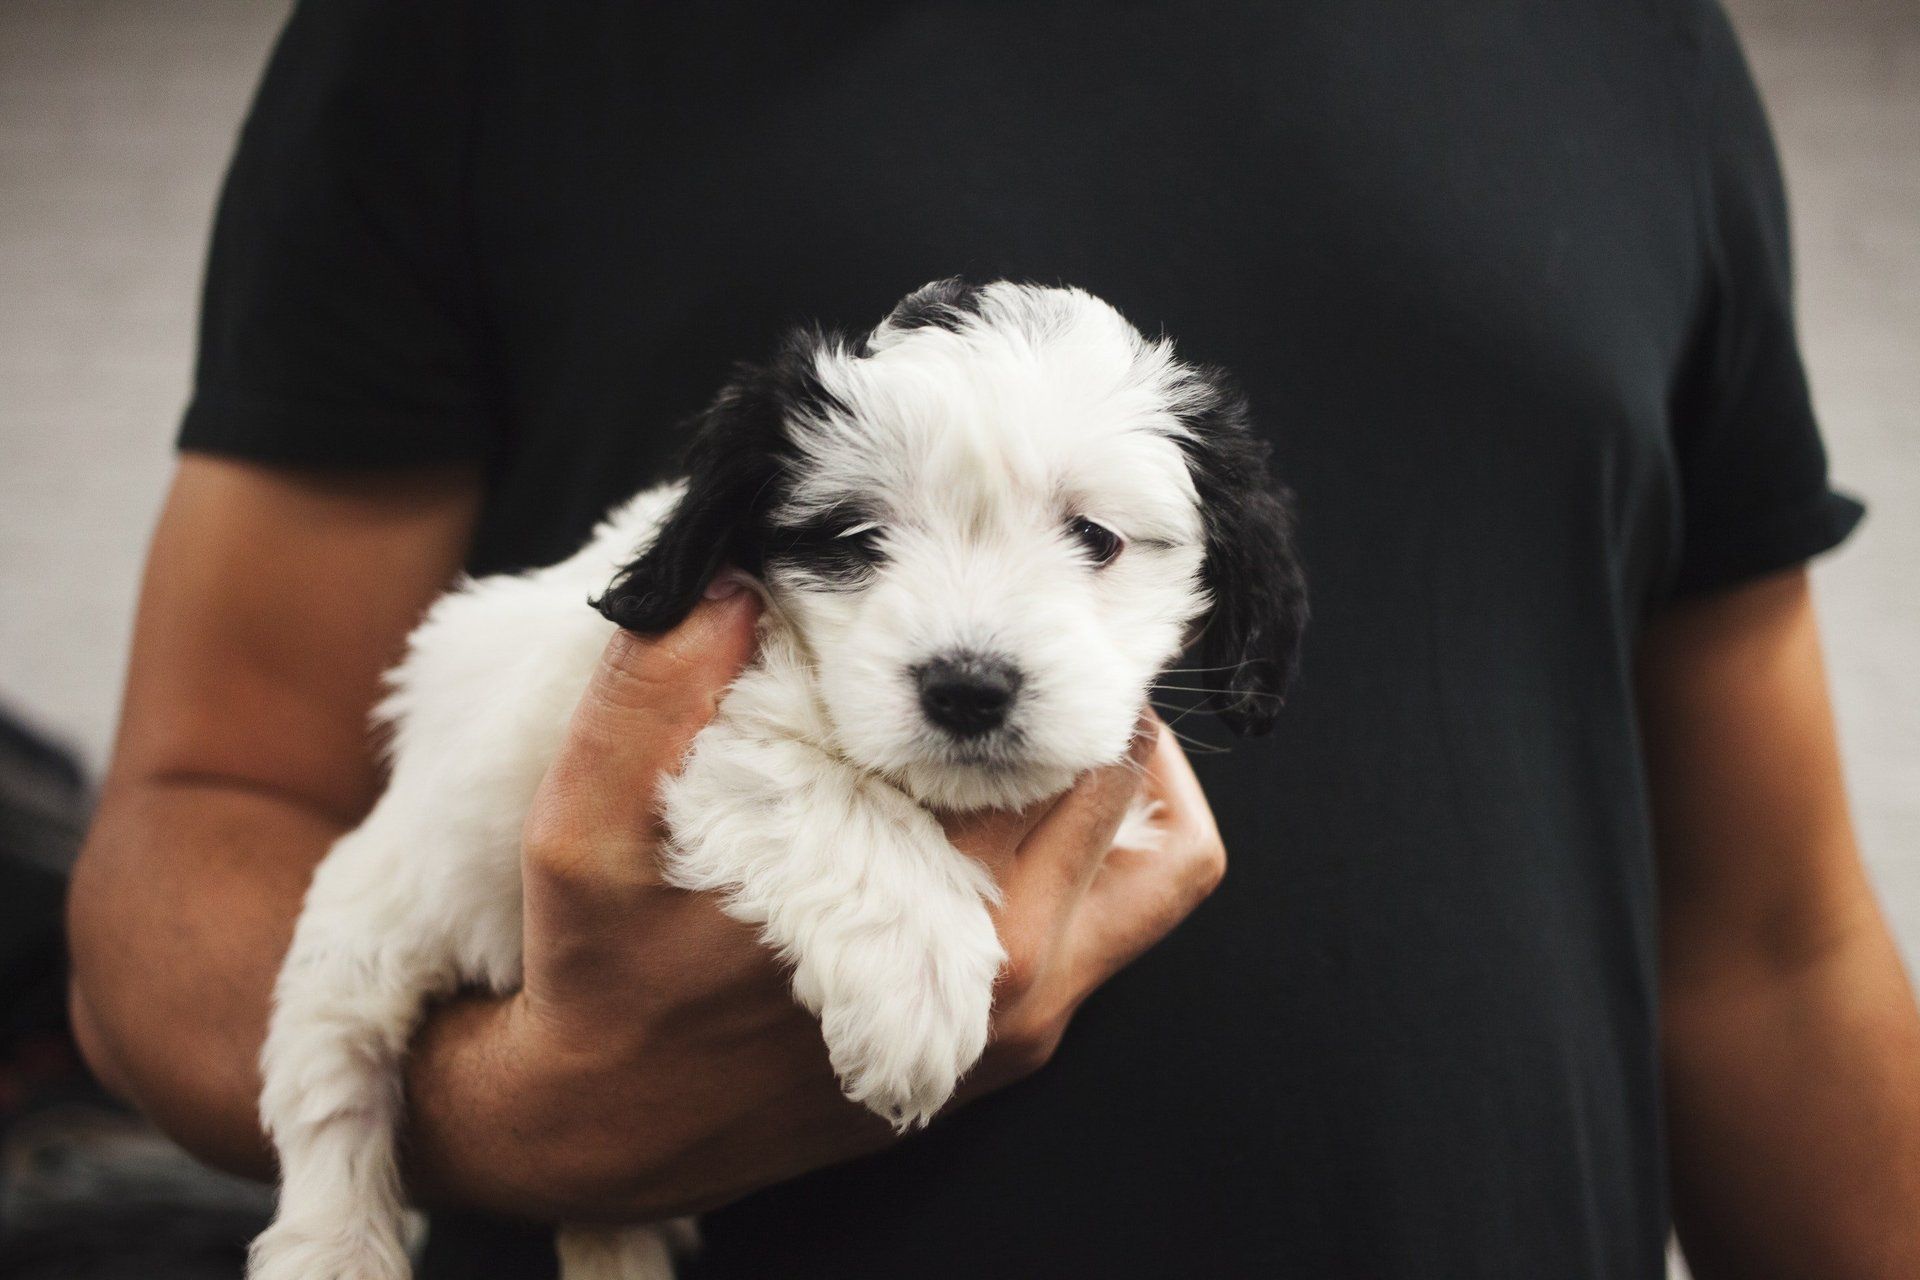 holding a white puppy with black ears